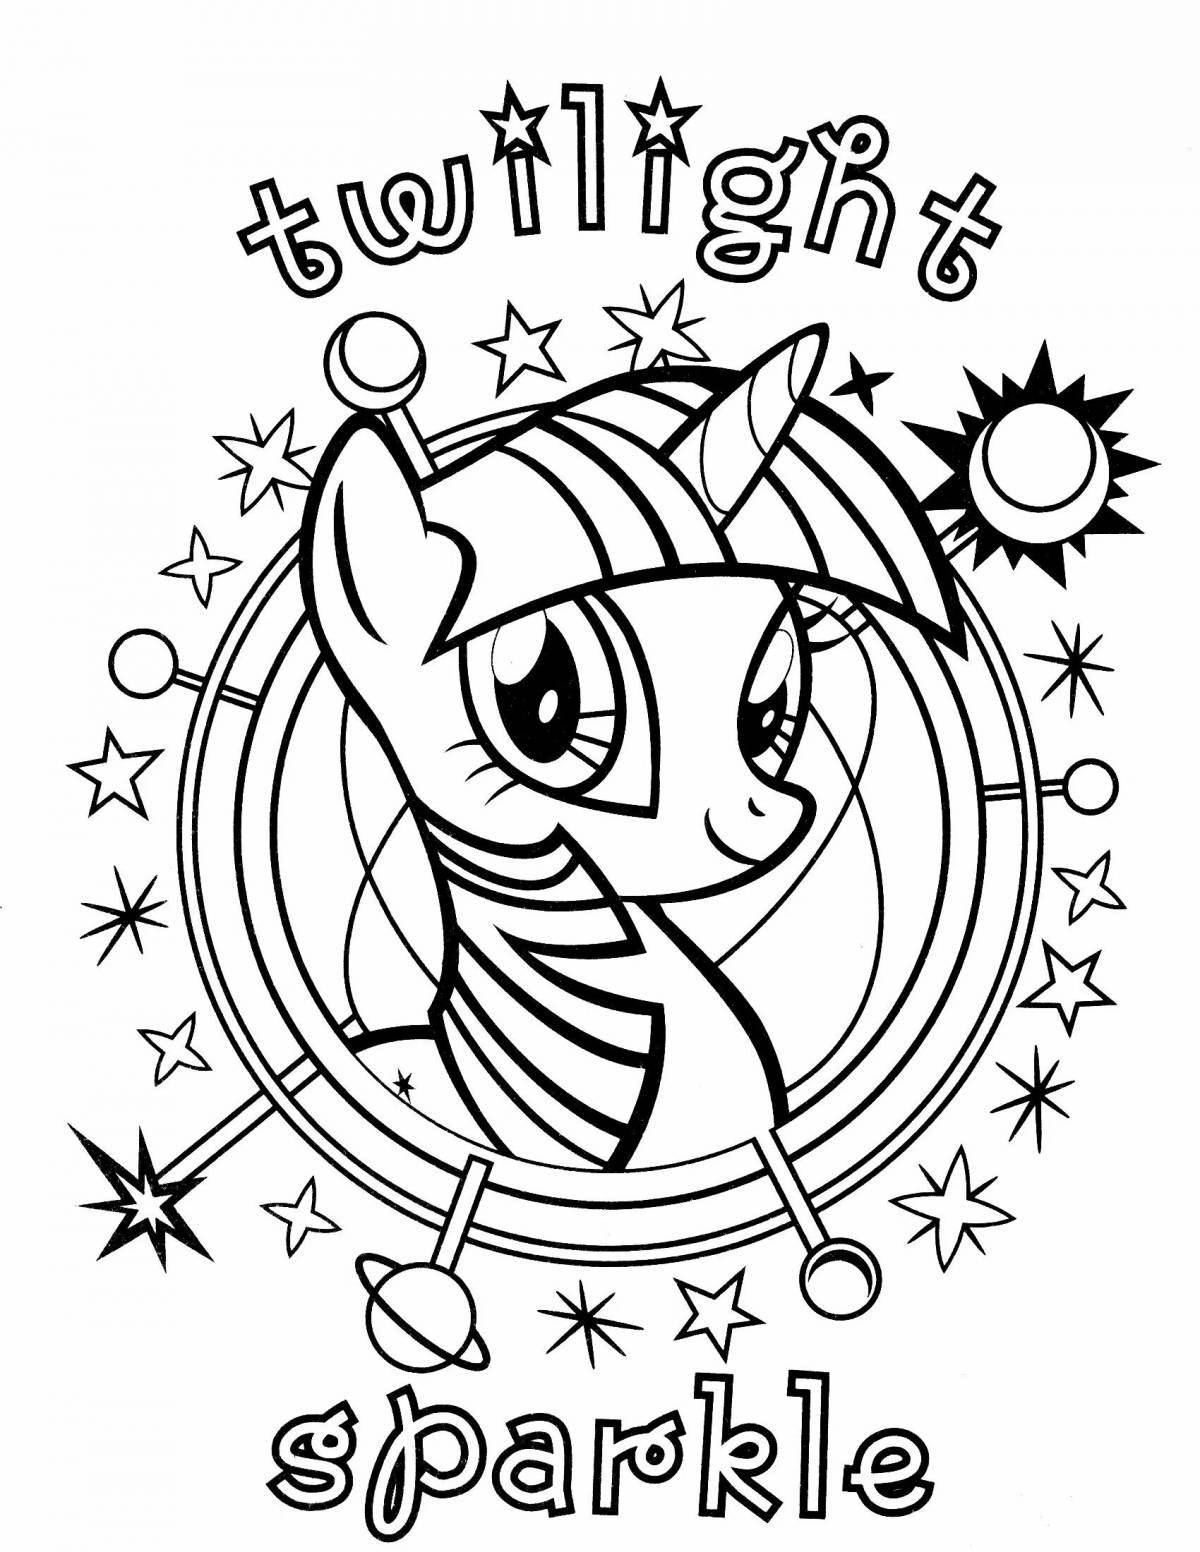 My little pony sparkle coloring book